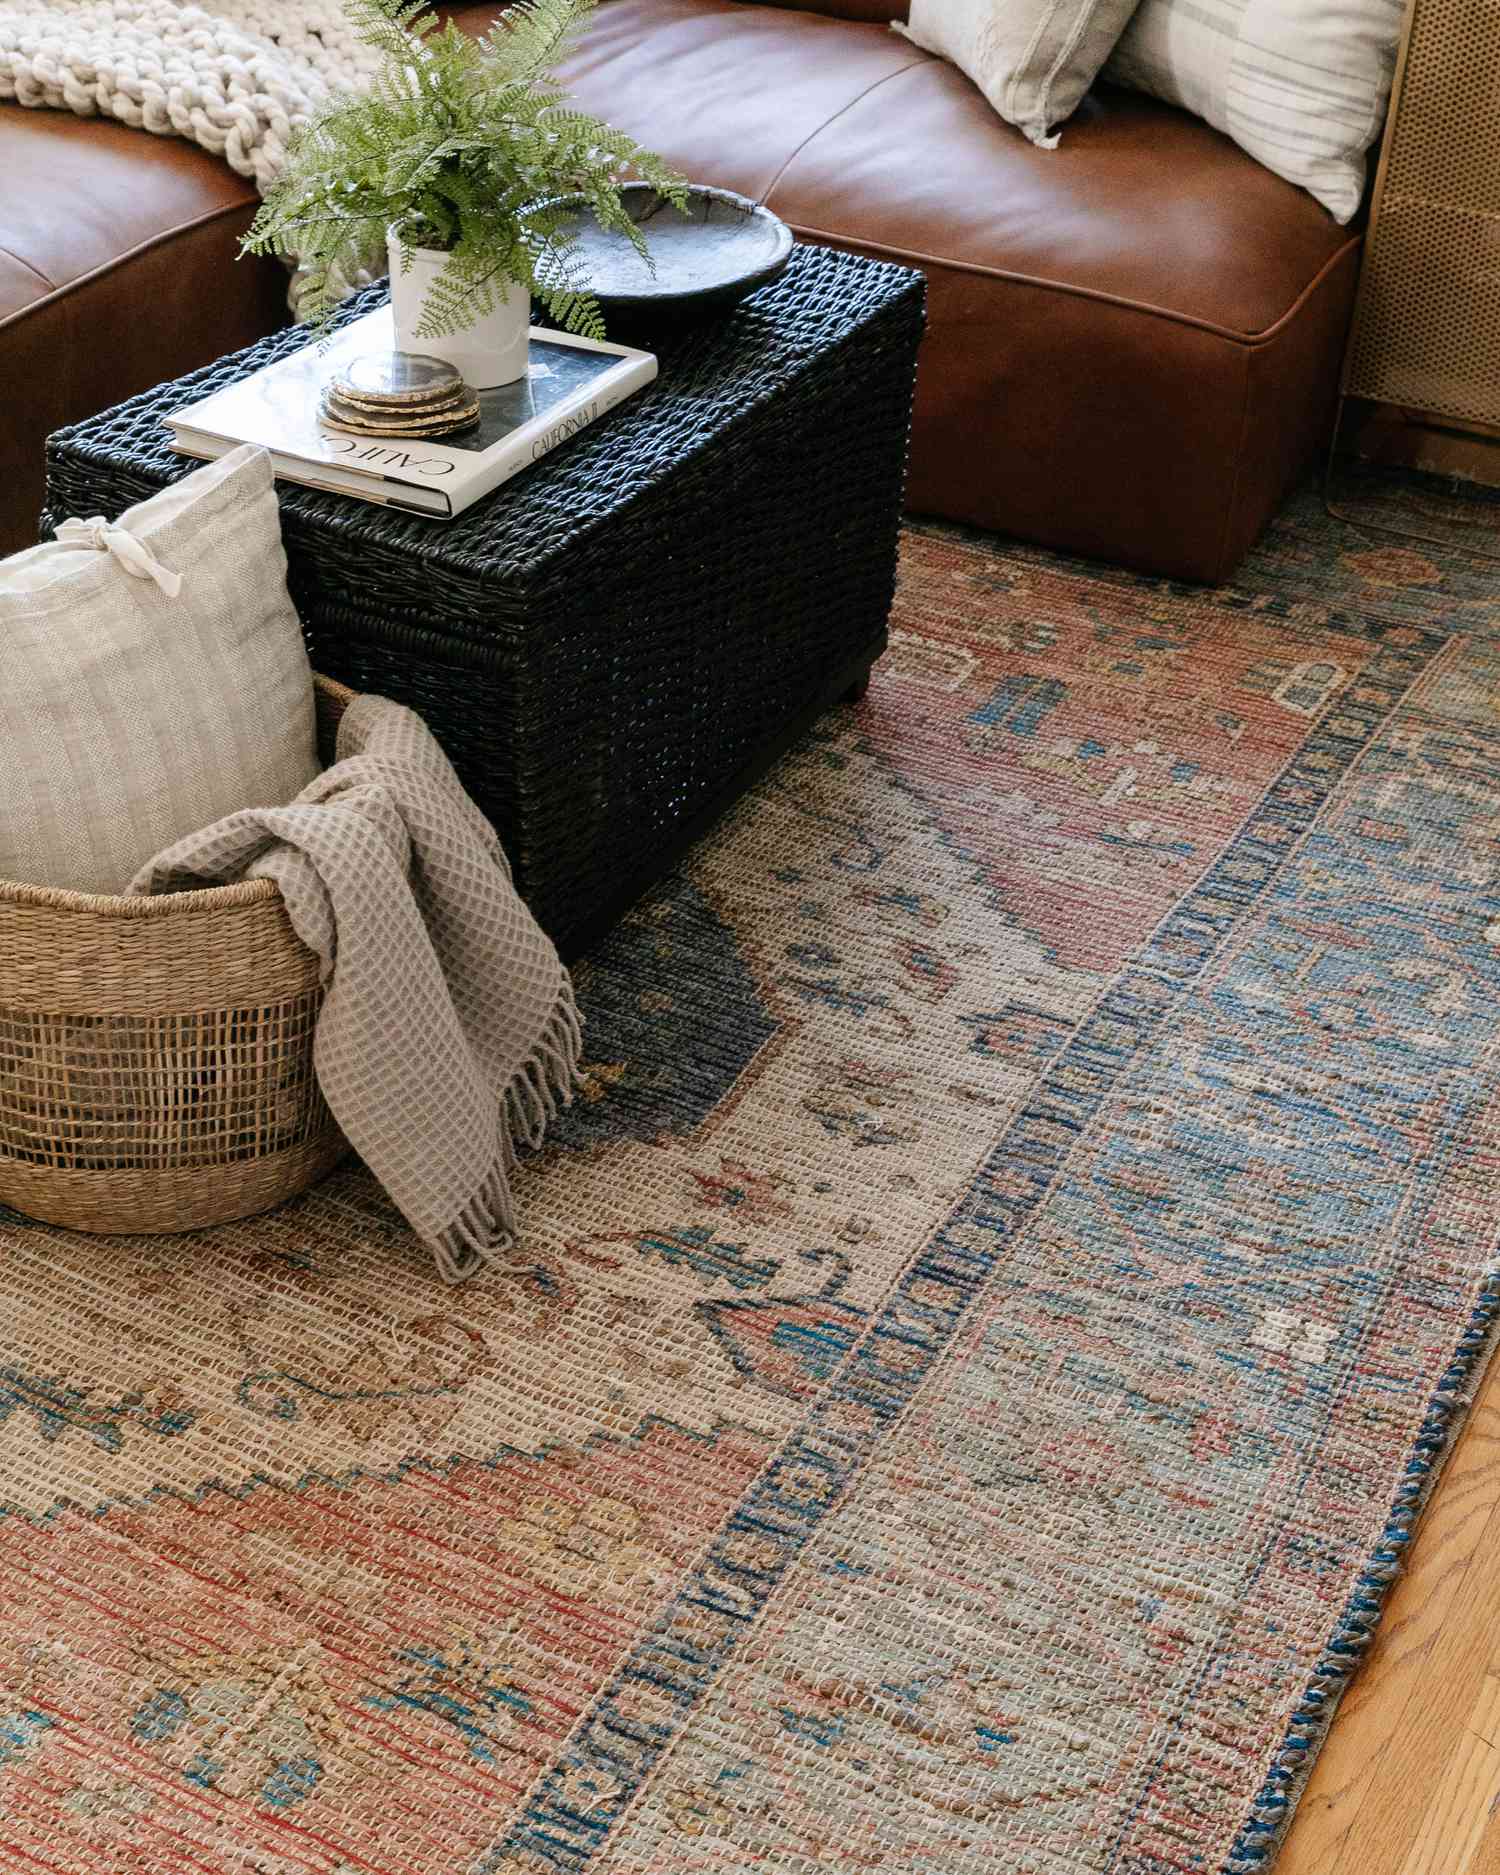  a rug in the home of drew scott, the lone fox